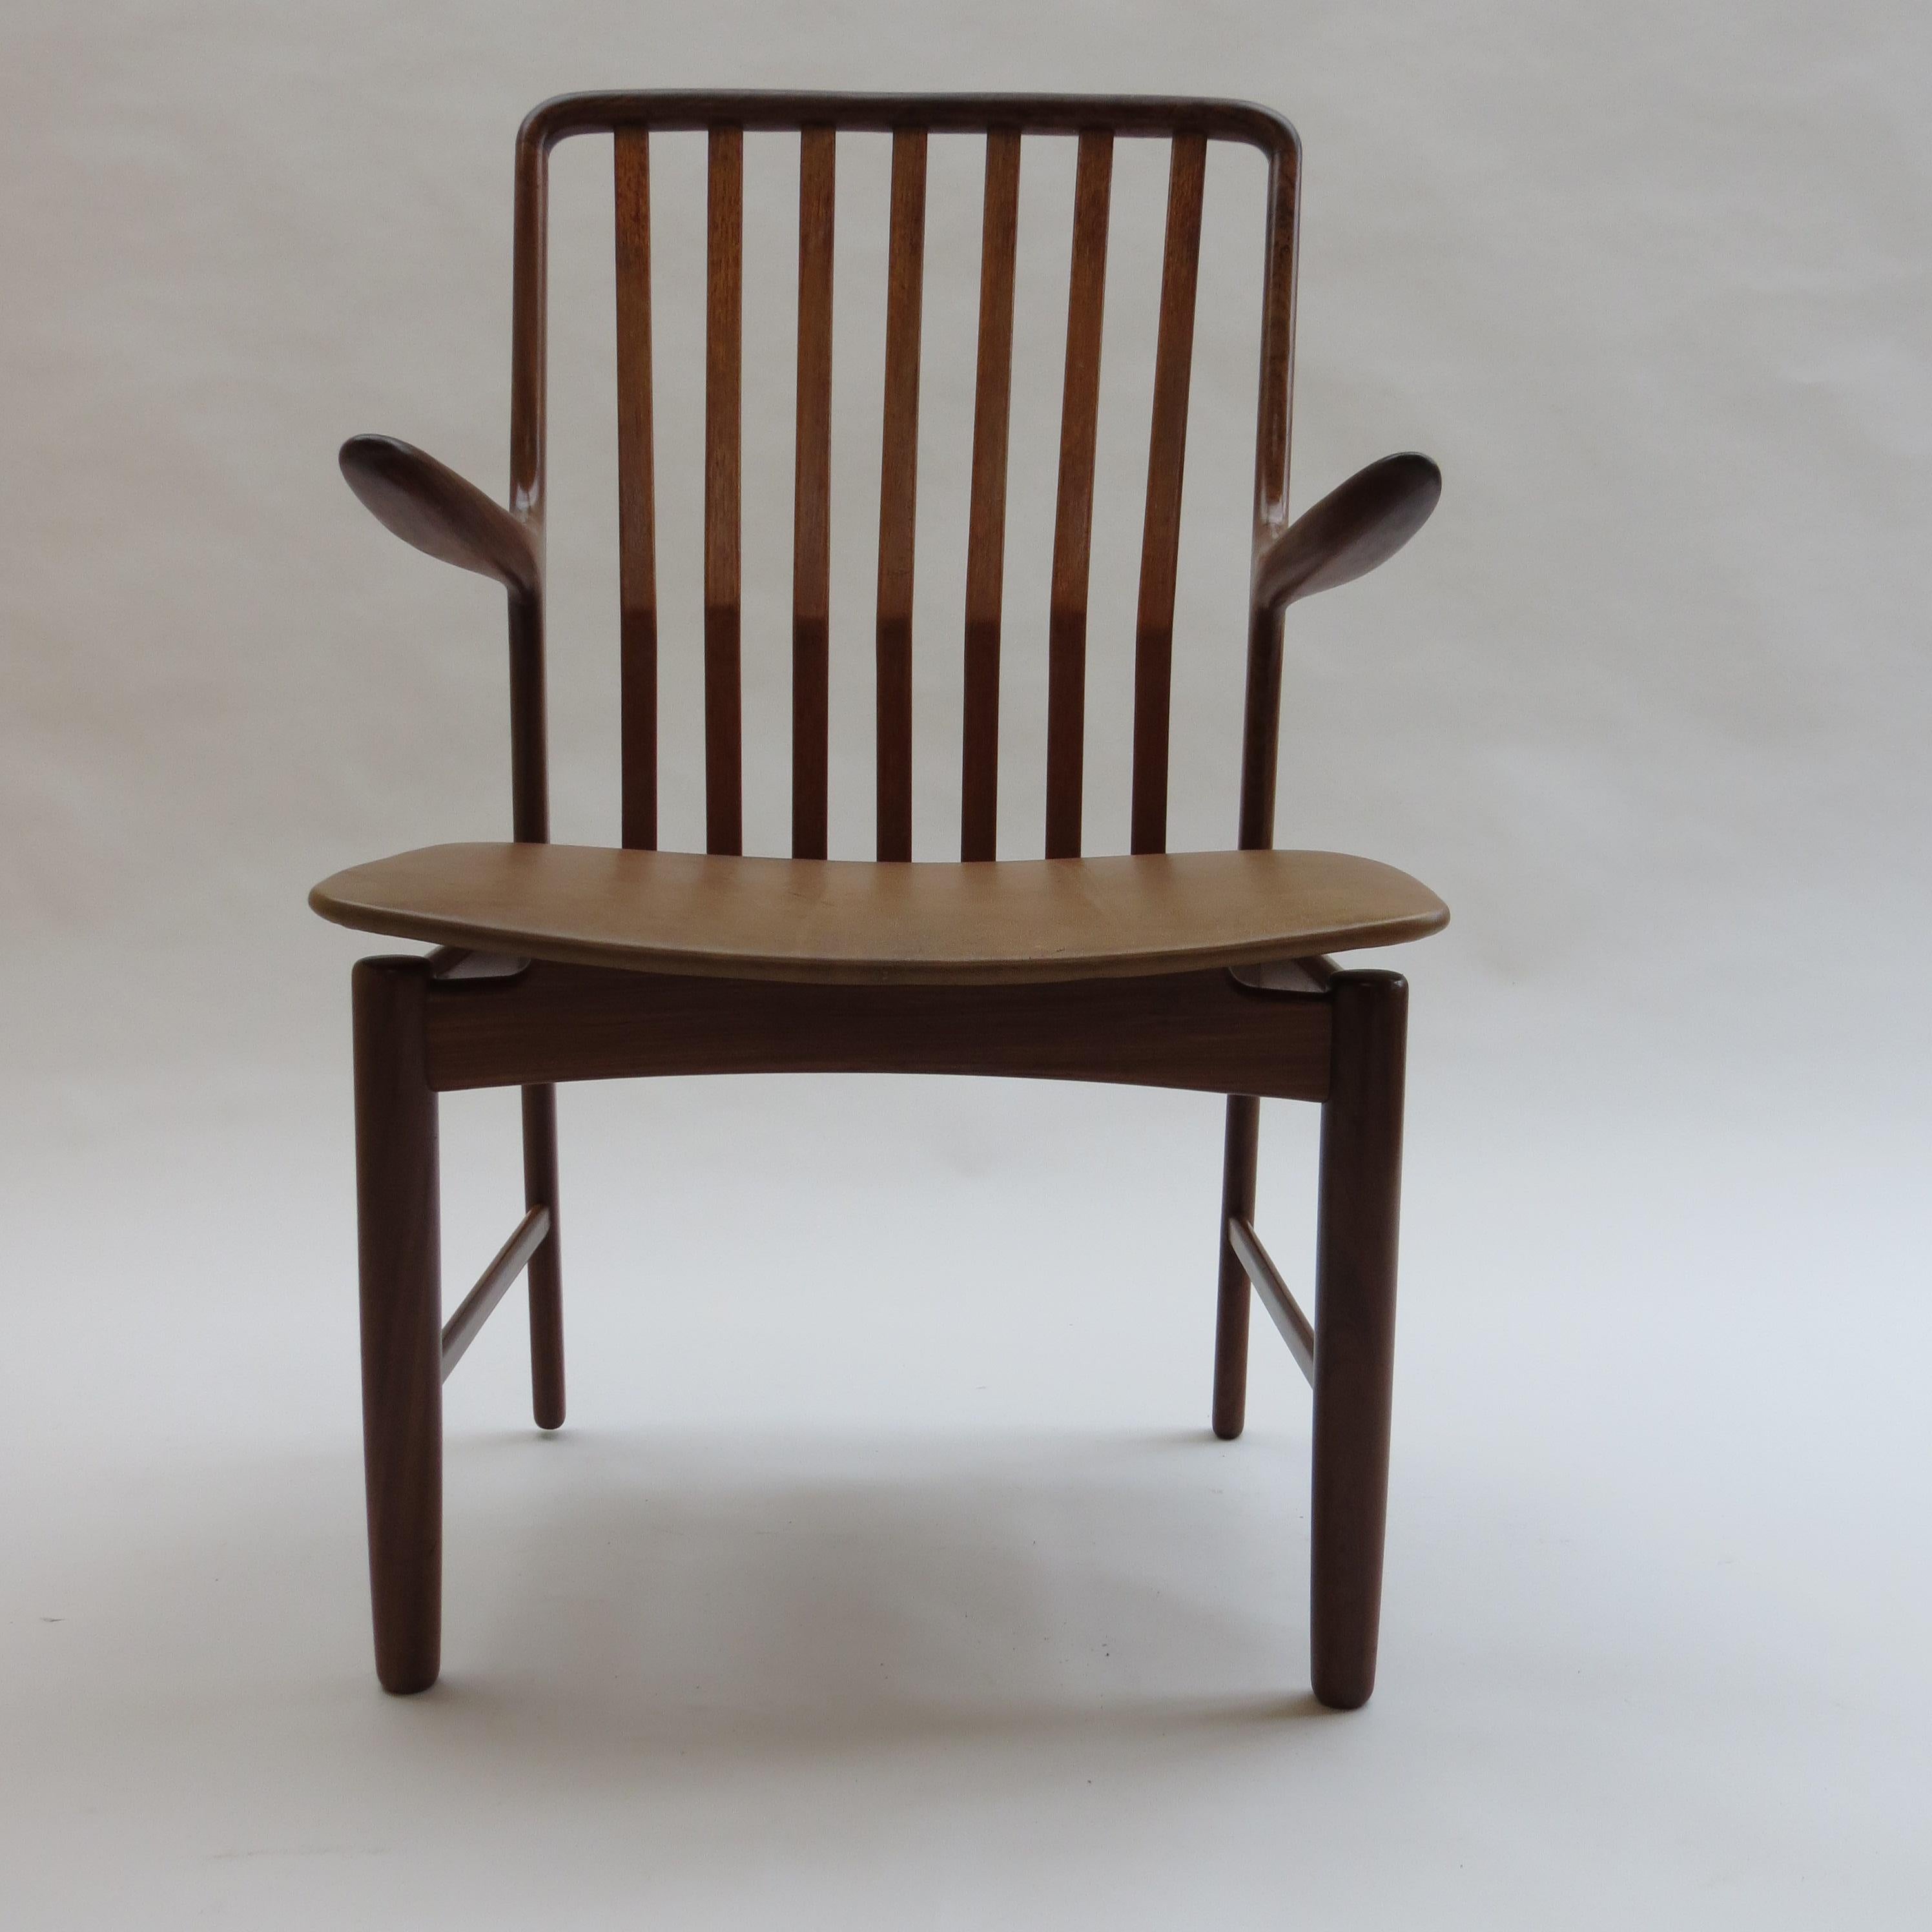 Danish chair in solid Afrormosia with solid teak slats, and newly reupholstered in vintage brown leather seat.

Designed by Svend Madsen, Denmark.

In good condition, the seat has recently been reupholstered with vintage leather. Stunning